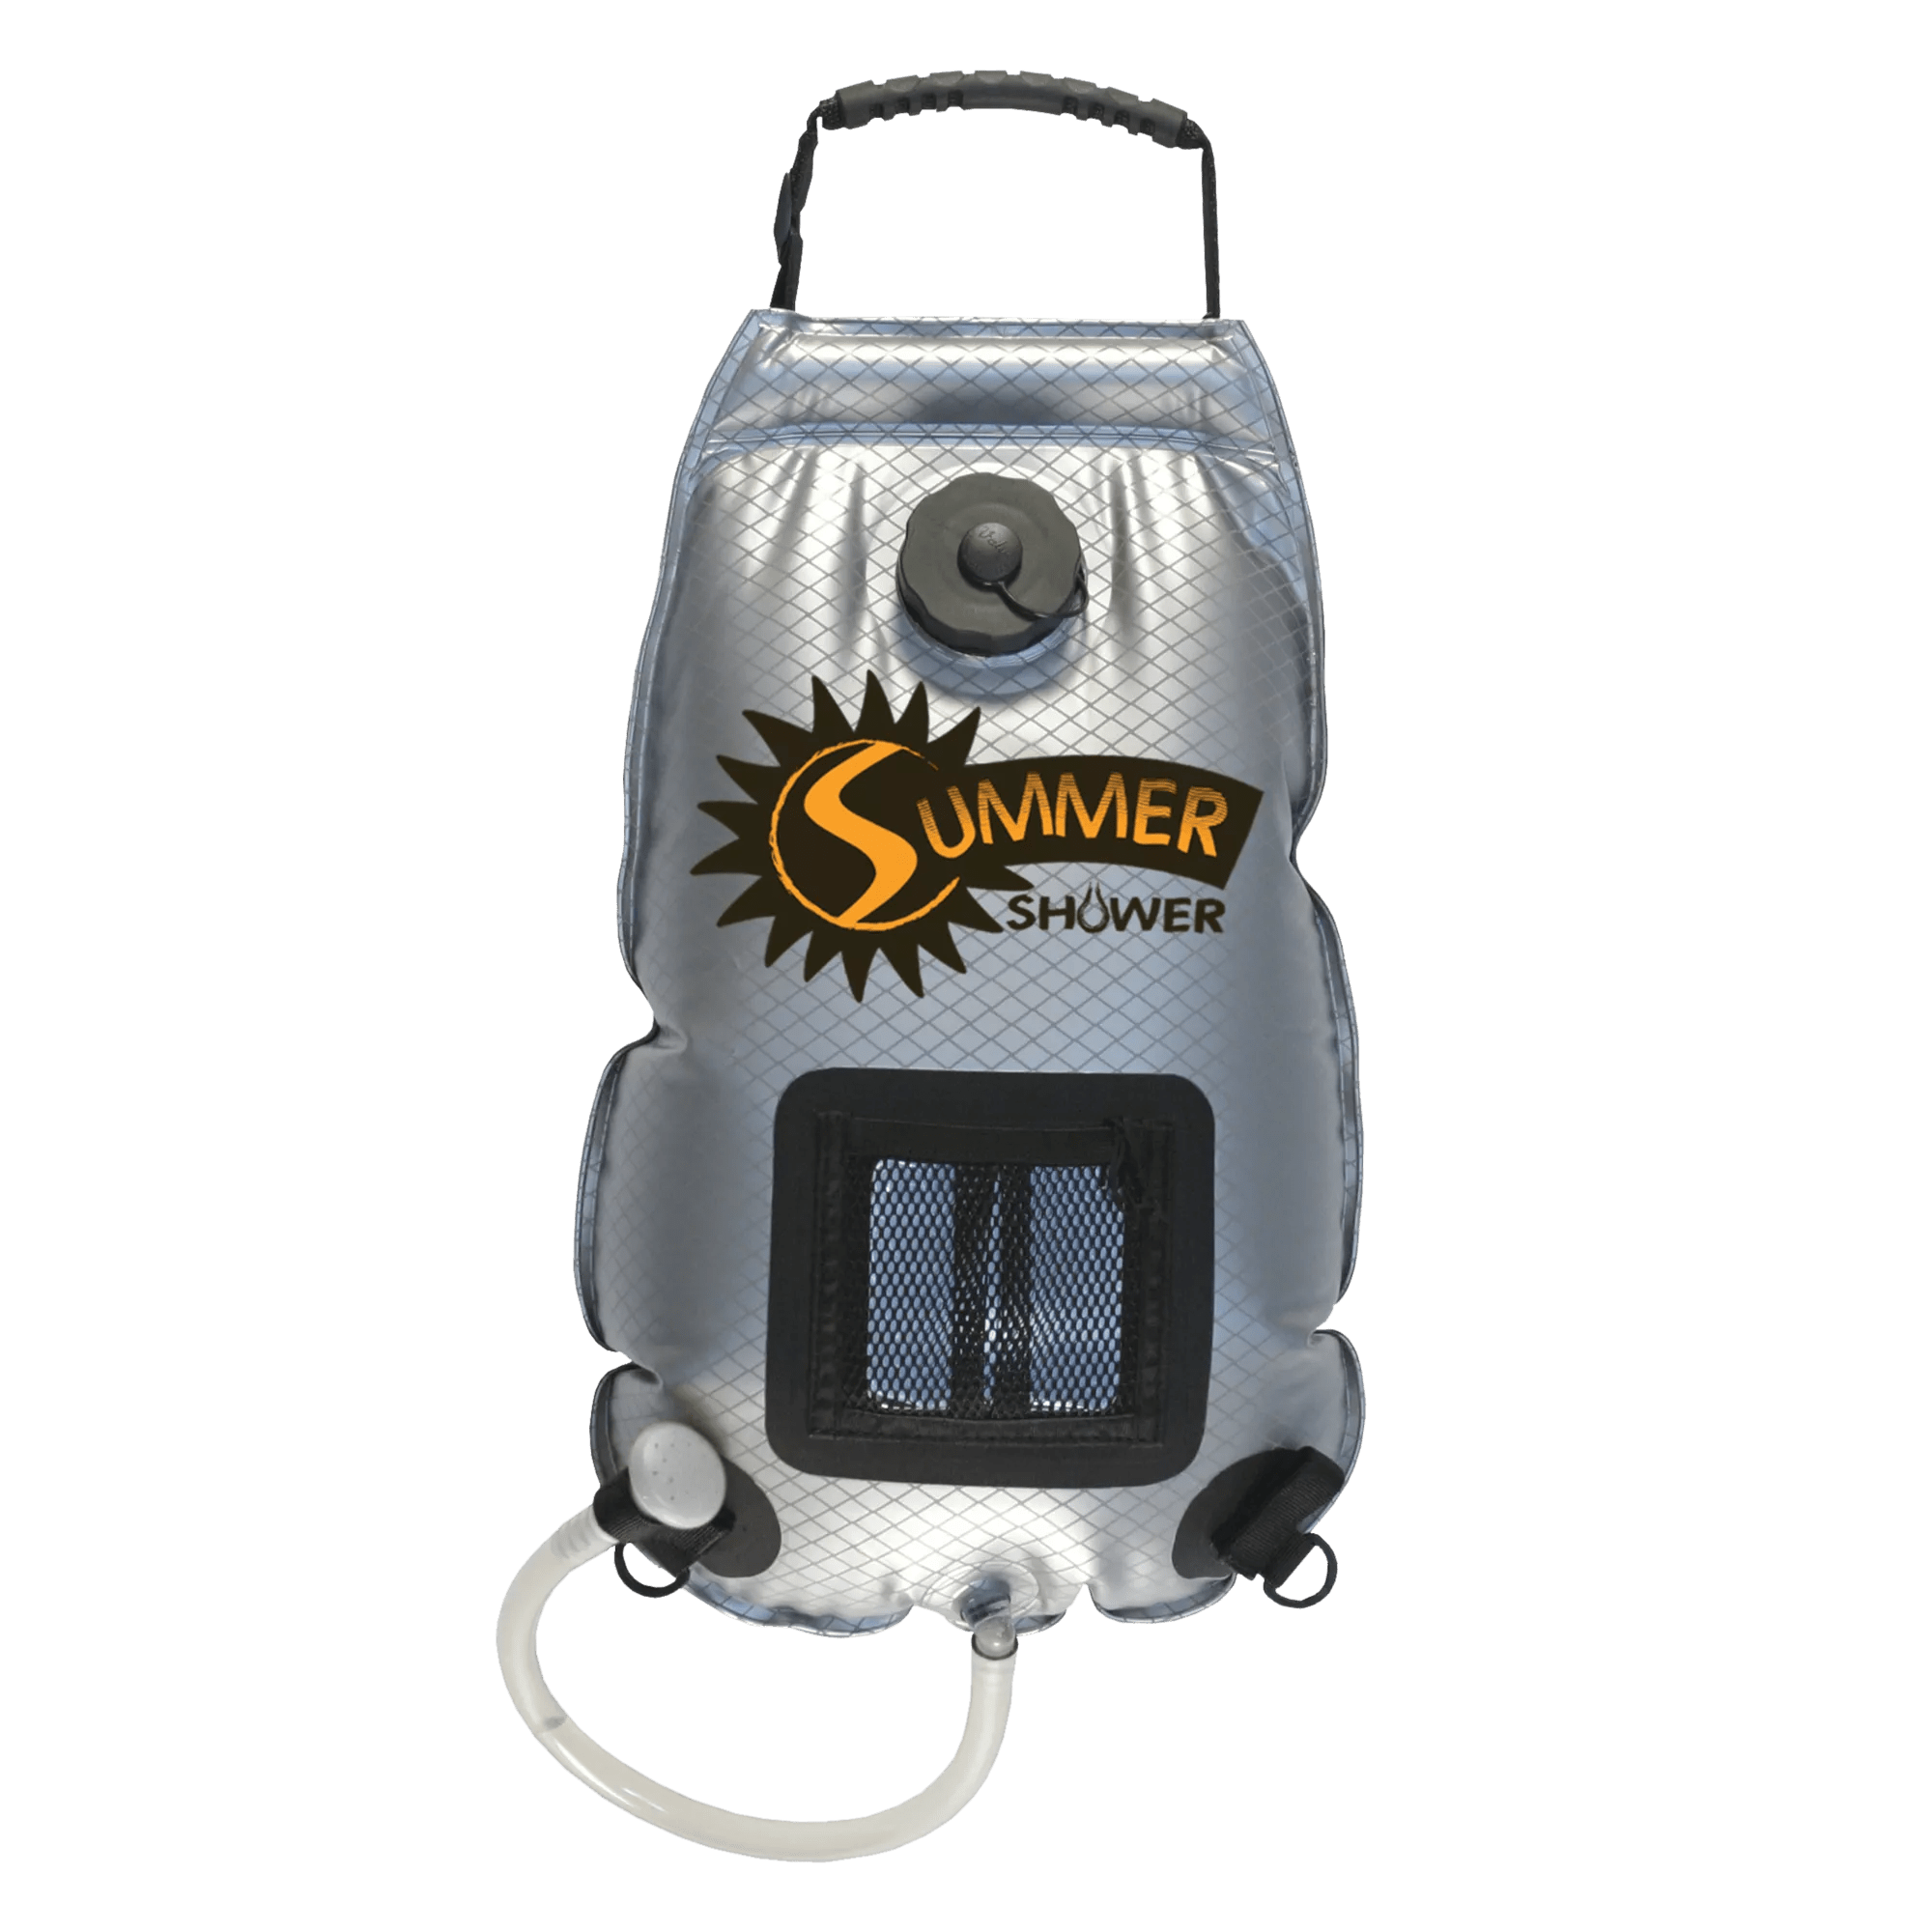 ADVANCED ELEMENTS - 3 Gallon Summer Shower (11.4L) -  - SS761 - ISO